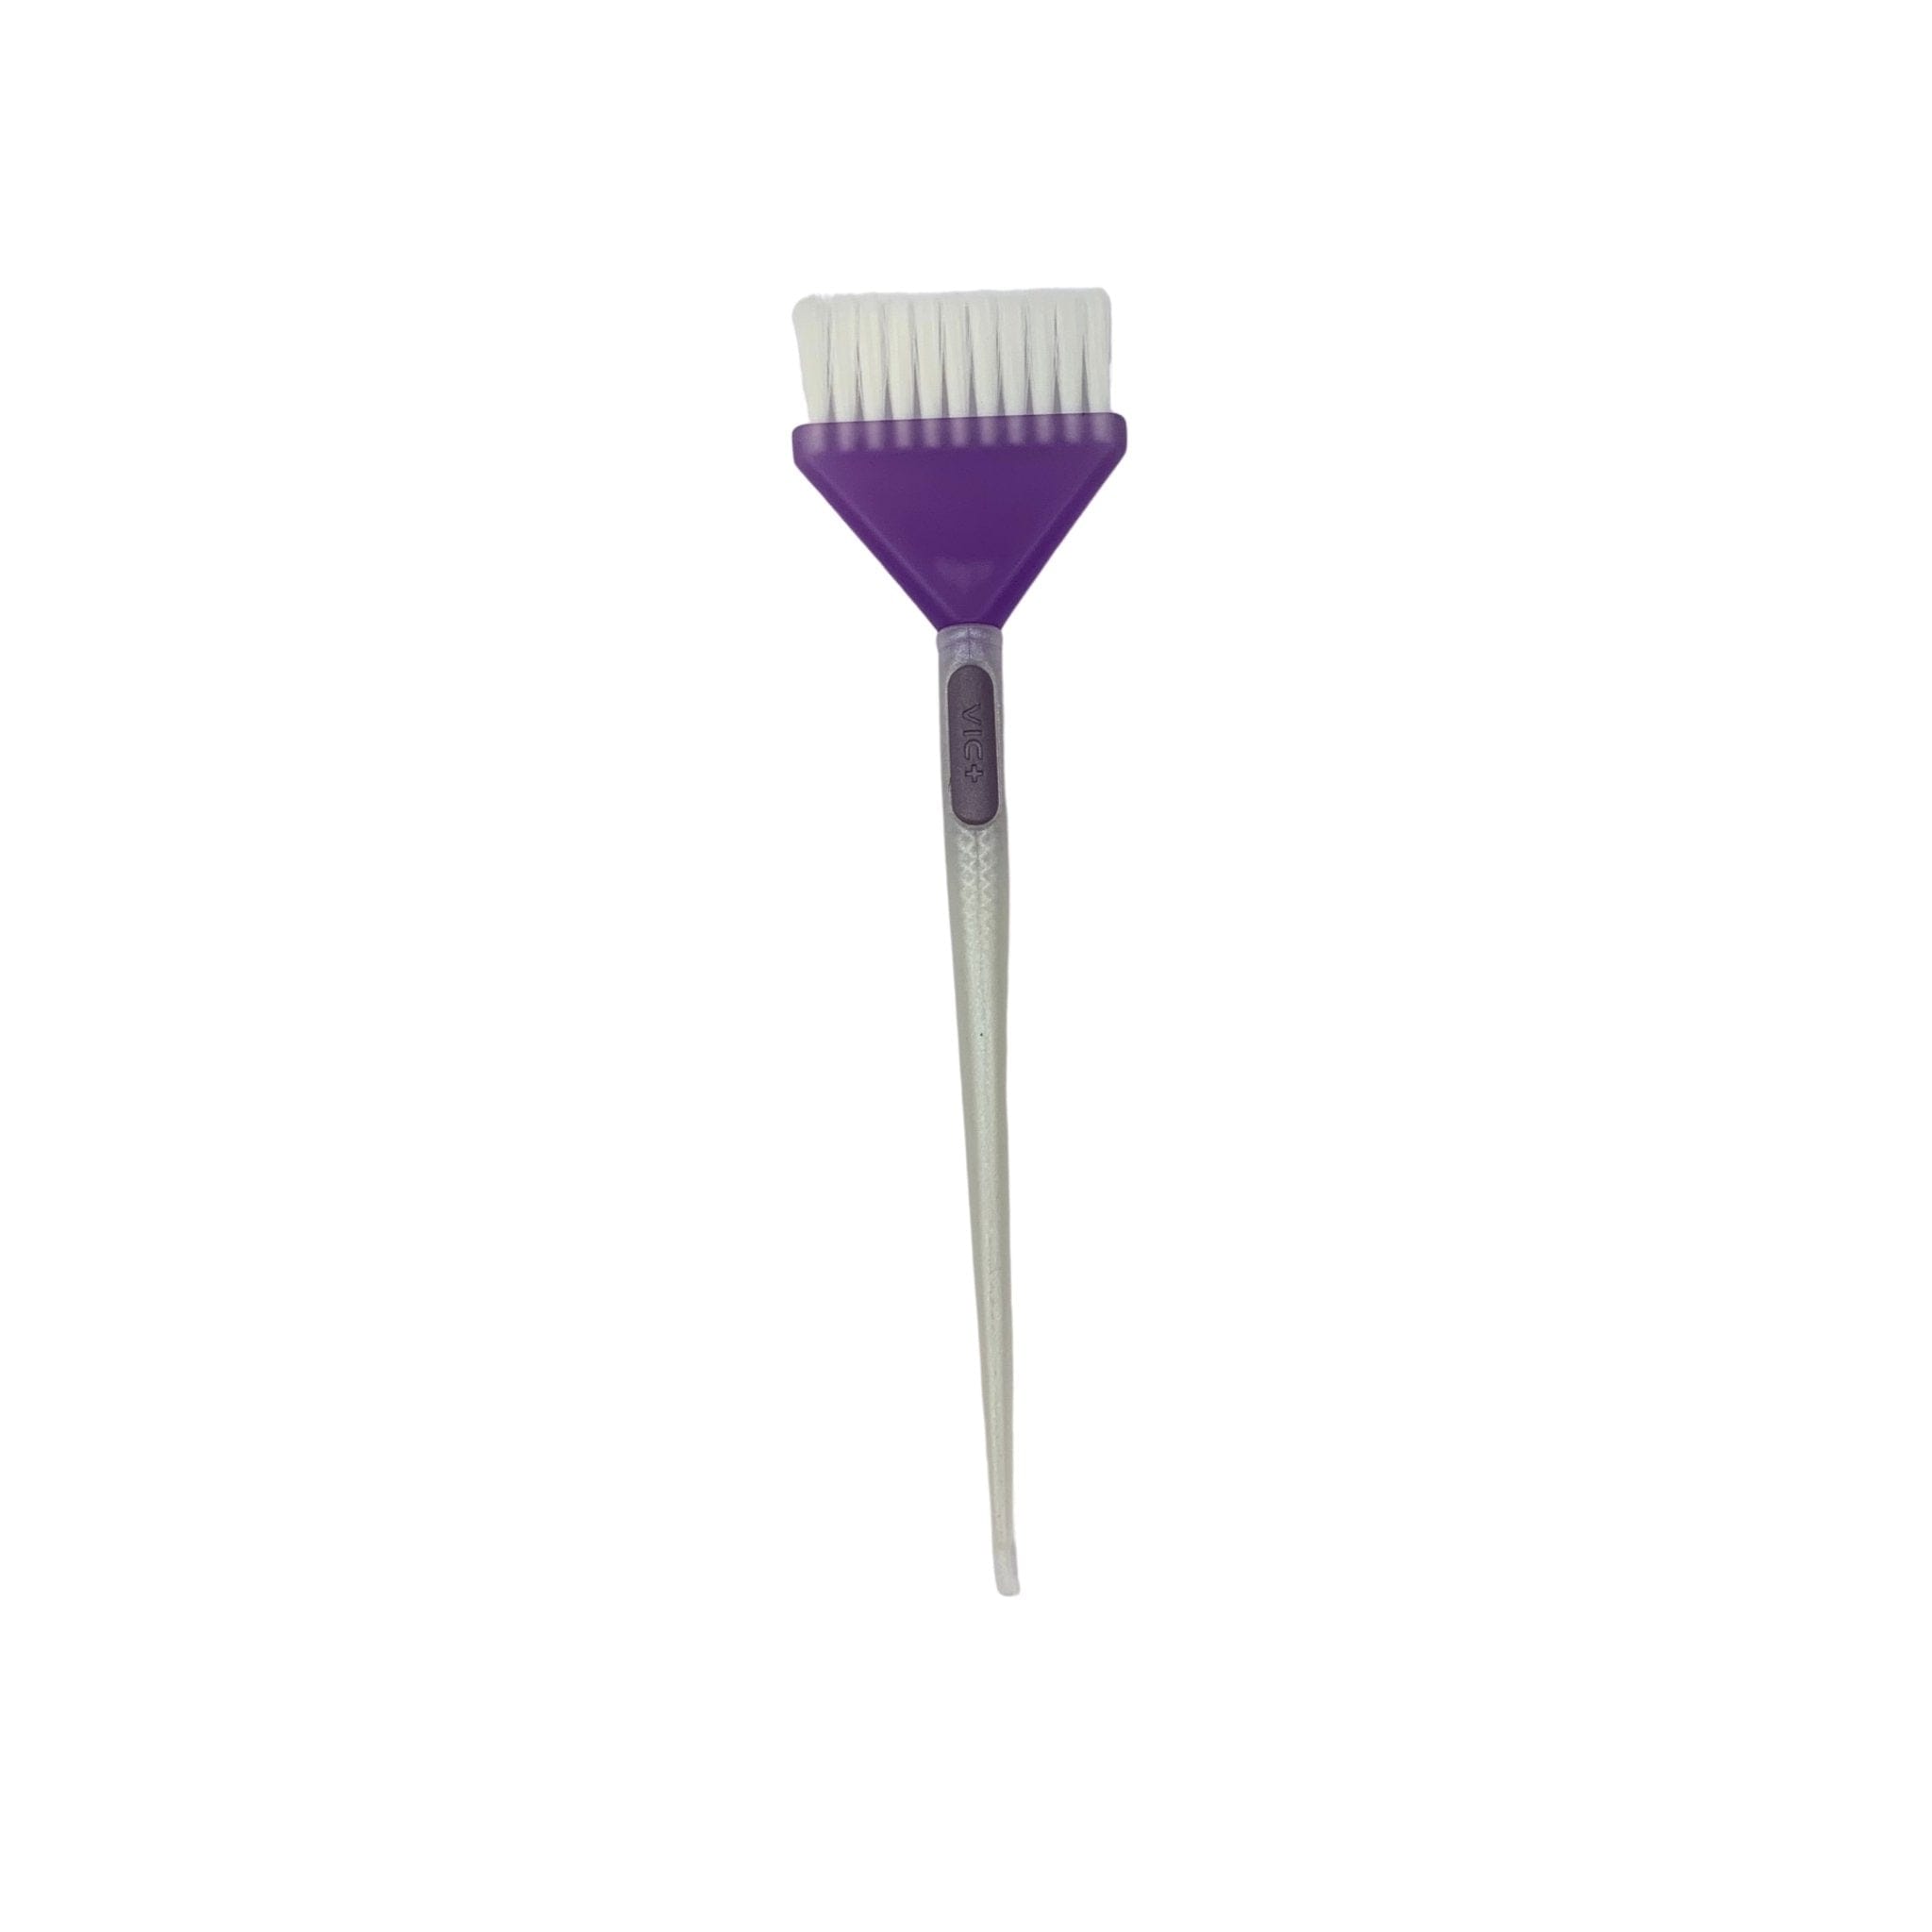 Purple Tint Brush with White Bristles - HairBeautyInk